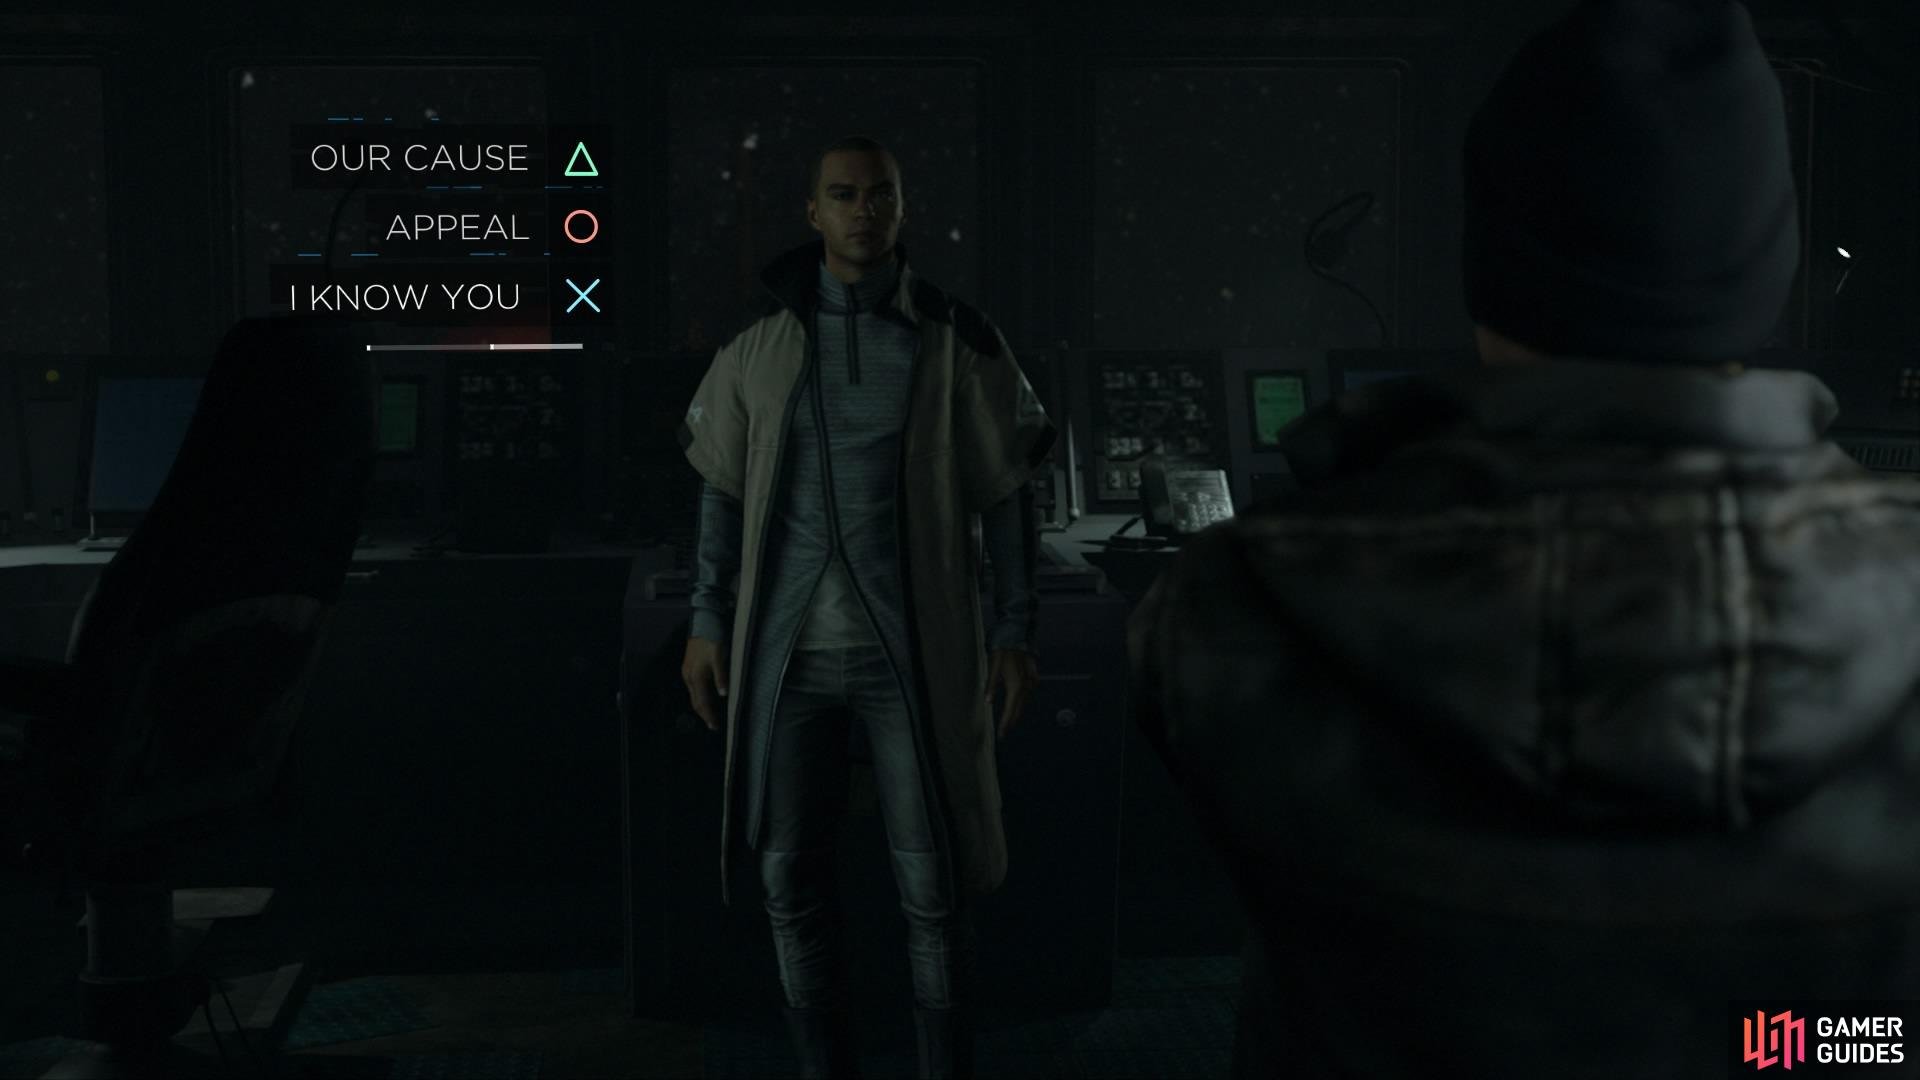 Play as both Markus and Connor